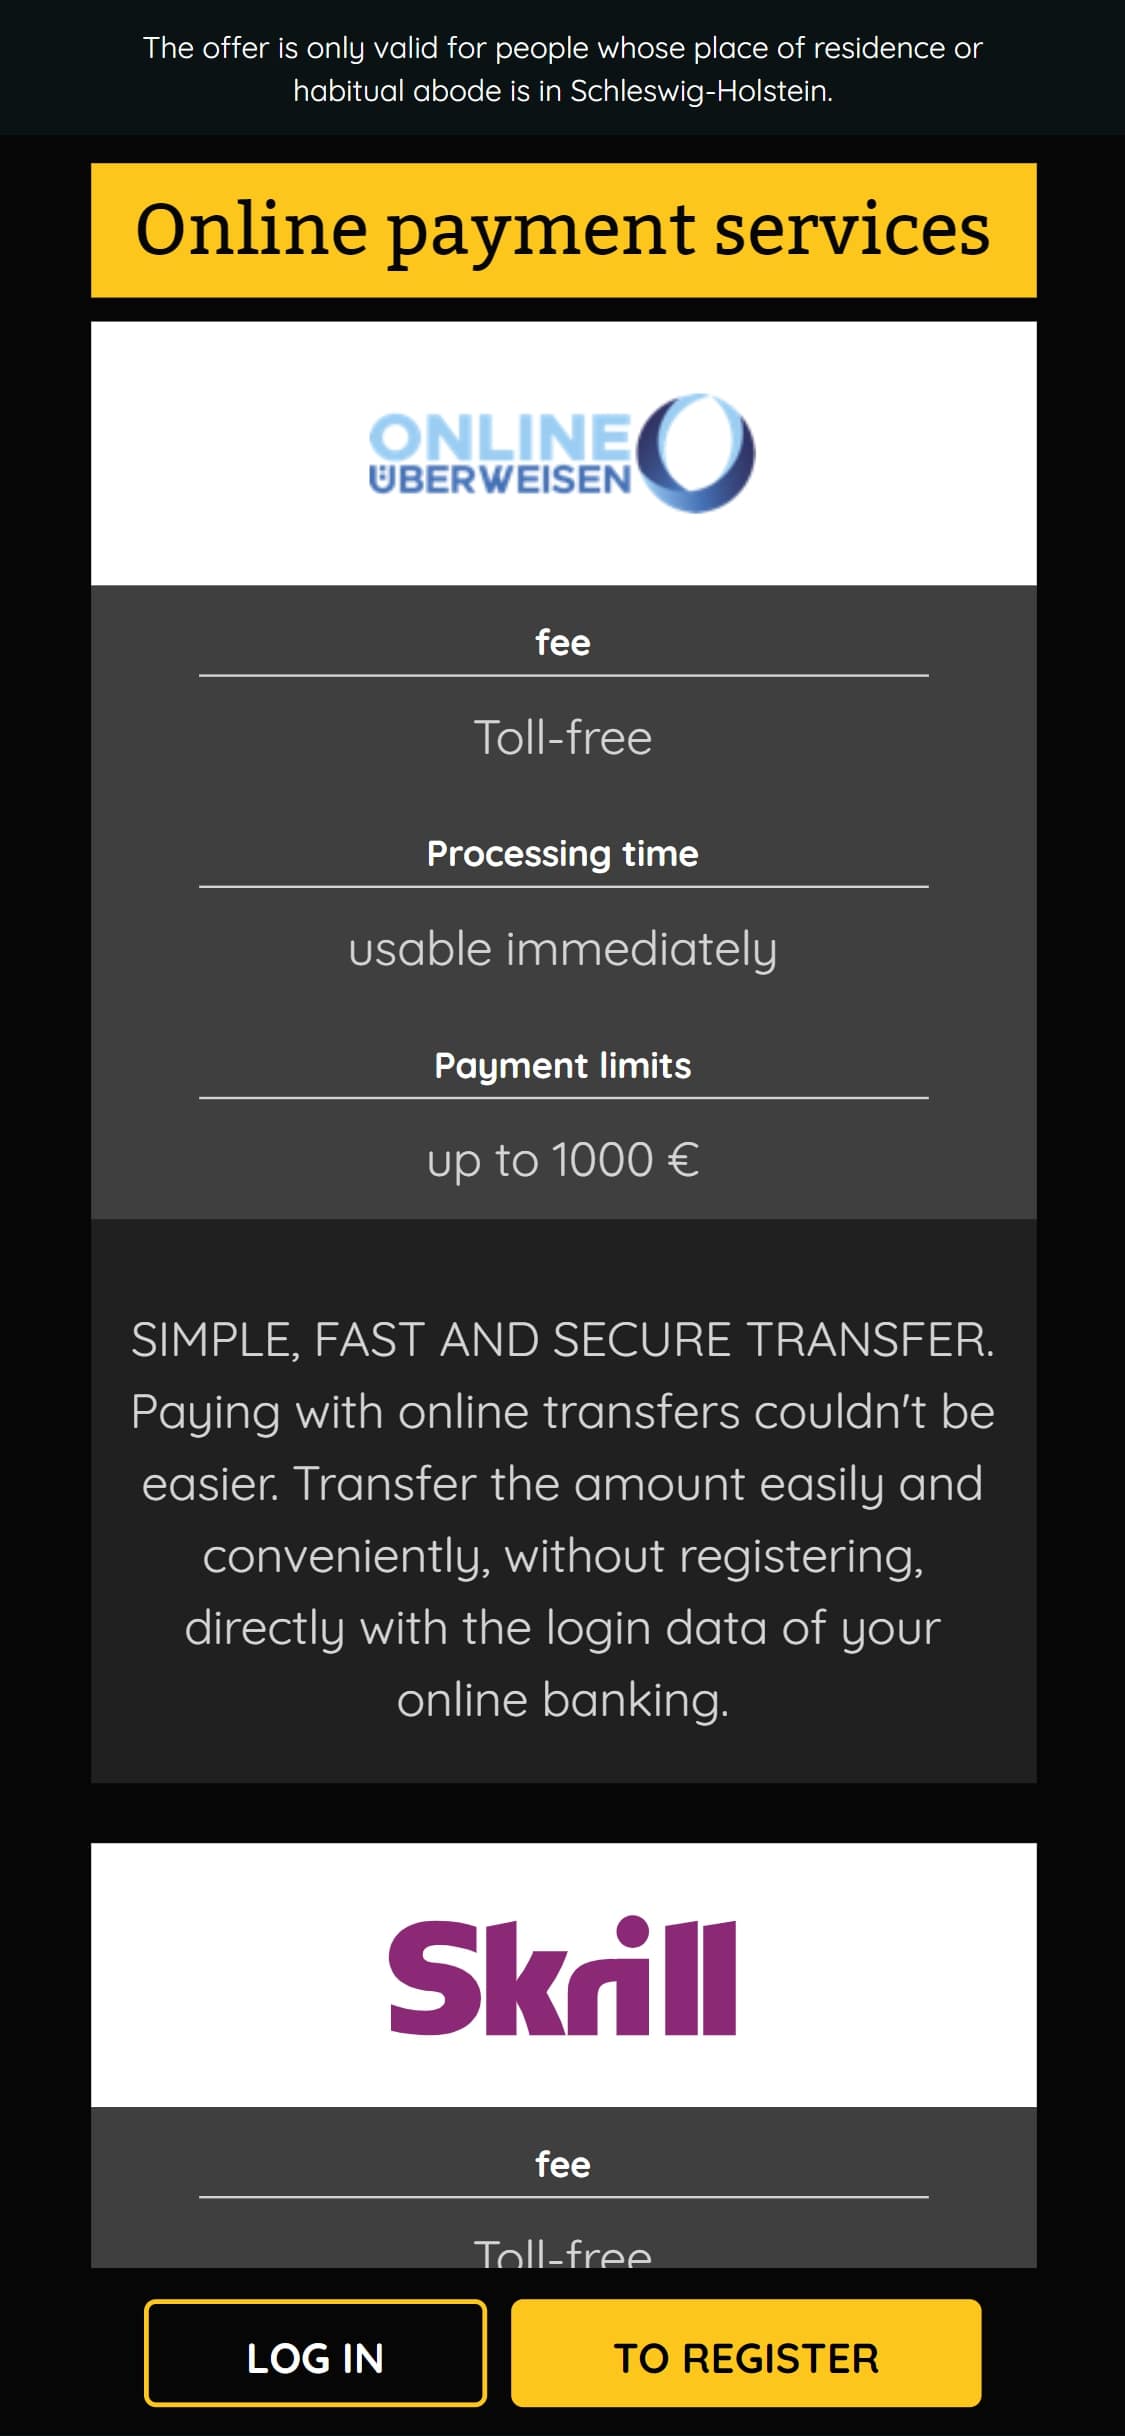 OnlineCasino Germany Mobile Payment Methods Review